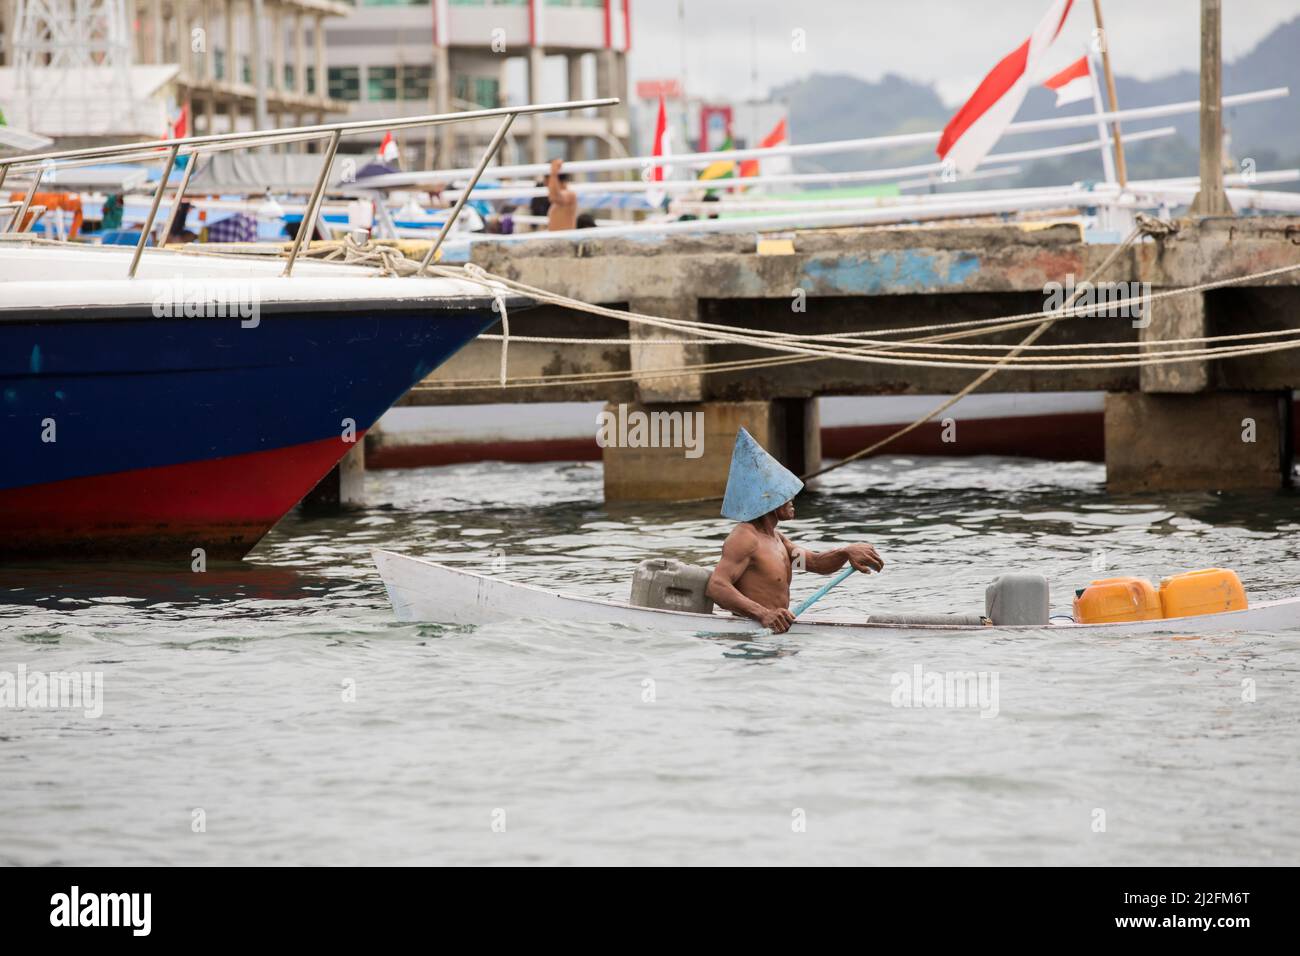 A man wearing a traditional conical hat steers a sinking canoe through the harbor and docks in Mamuju city, Sulawesi, Indonesia, Asia. Stock Photo